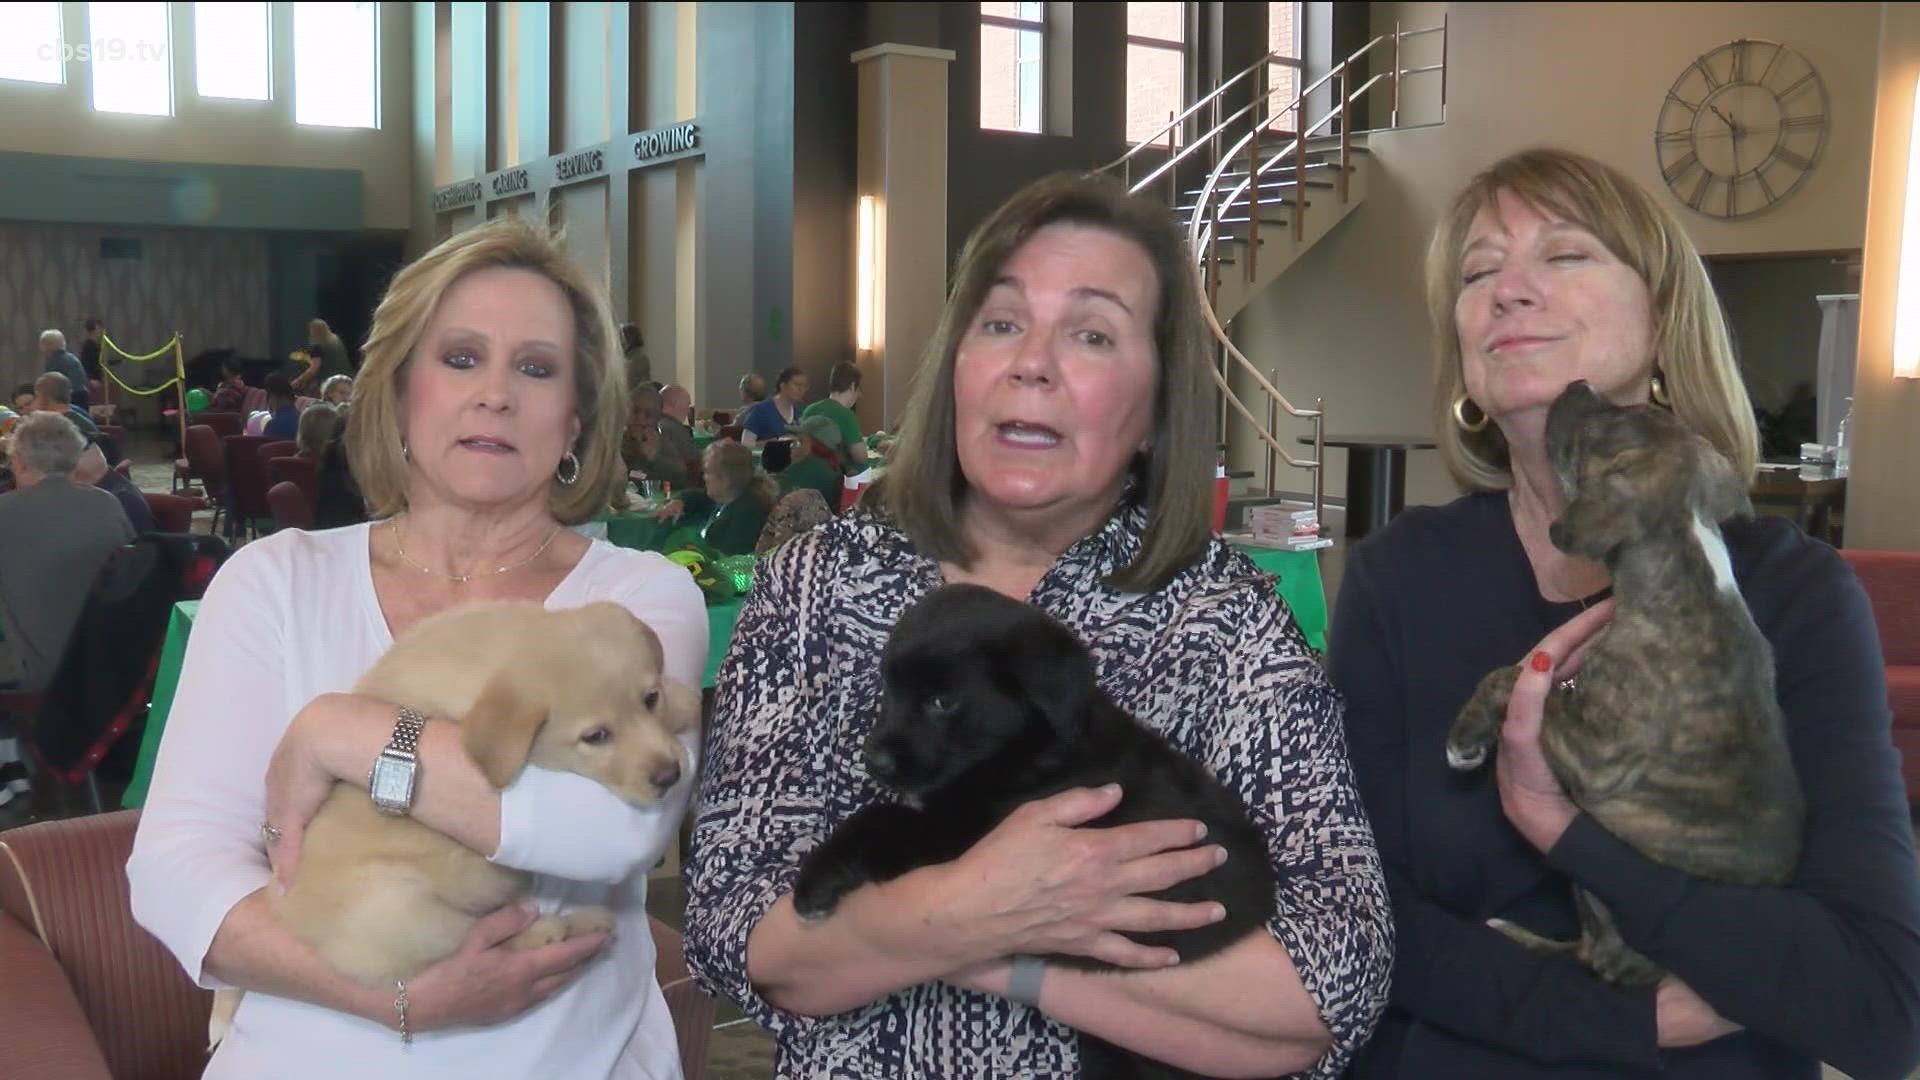 Alzheimer's Alliance of Smith County day club members receive visit from SPCA puppies